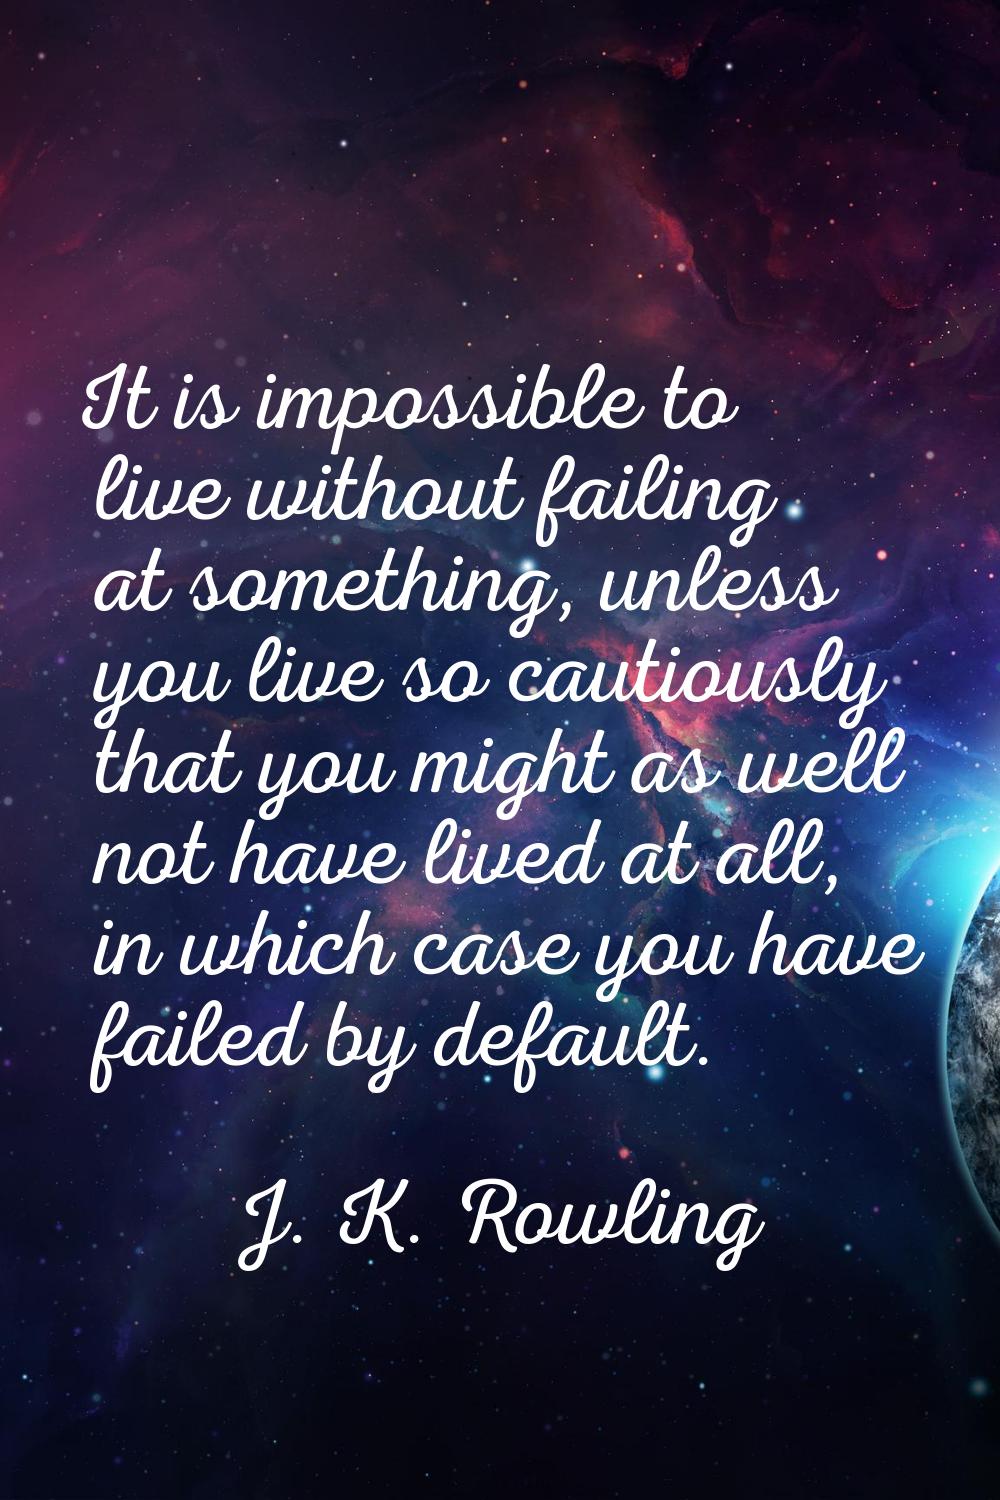 It is impossible to live without failing at something, unless you live so cautiously that you might